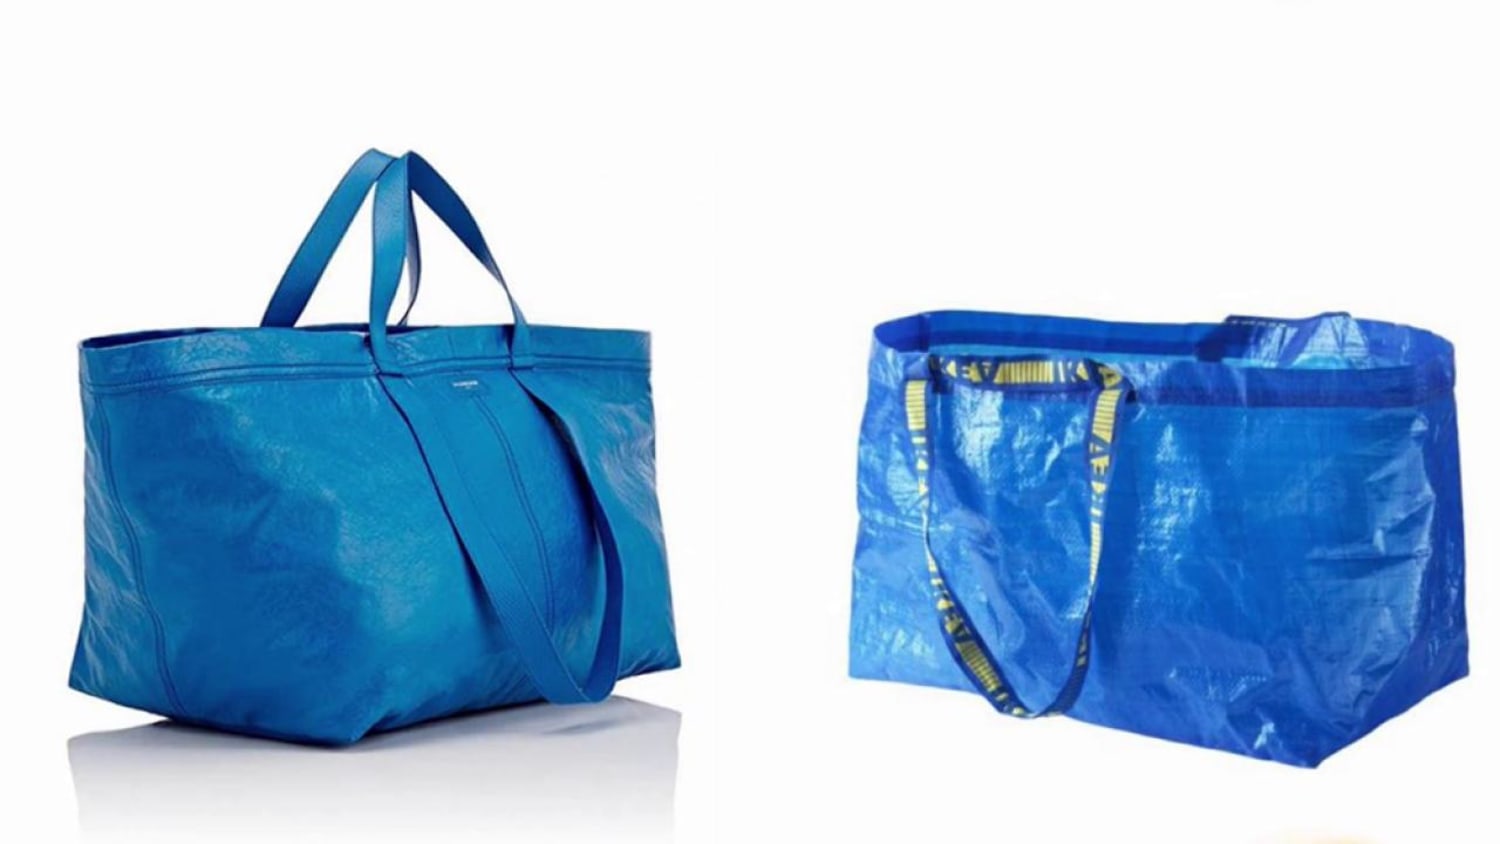 Balenciaga's new $1,800 bag is nothing but a pricey packet of Lay's potato  chips - Luxurylaunches